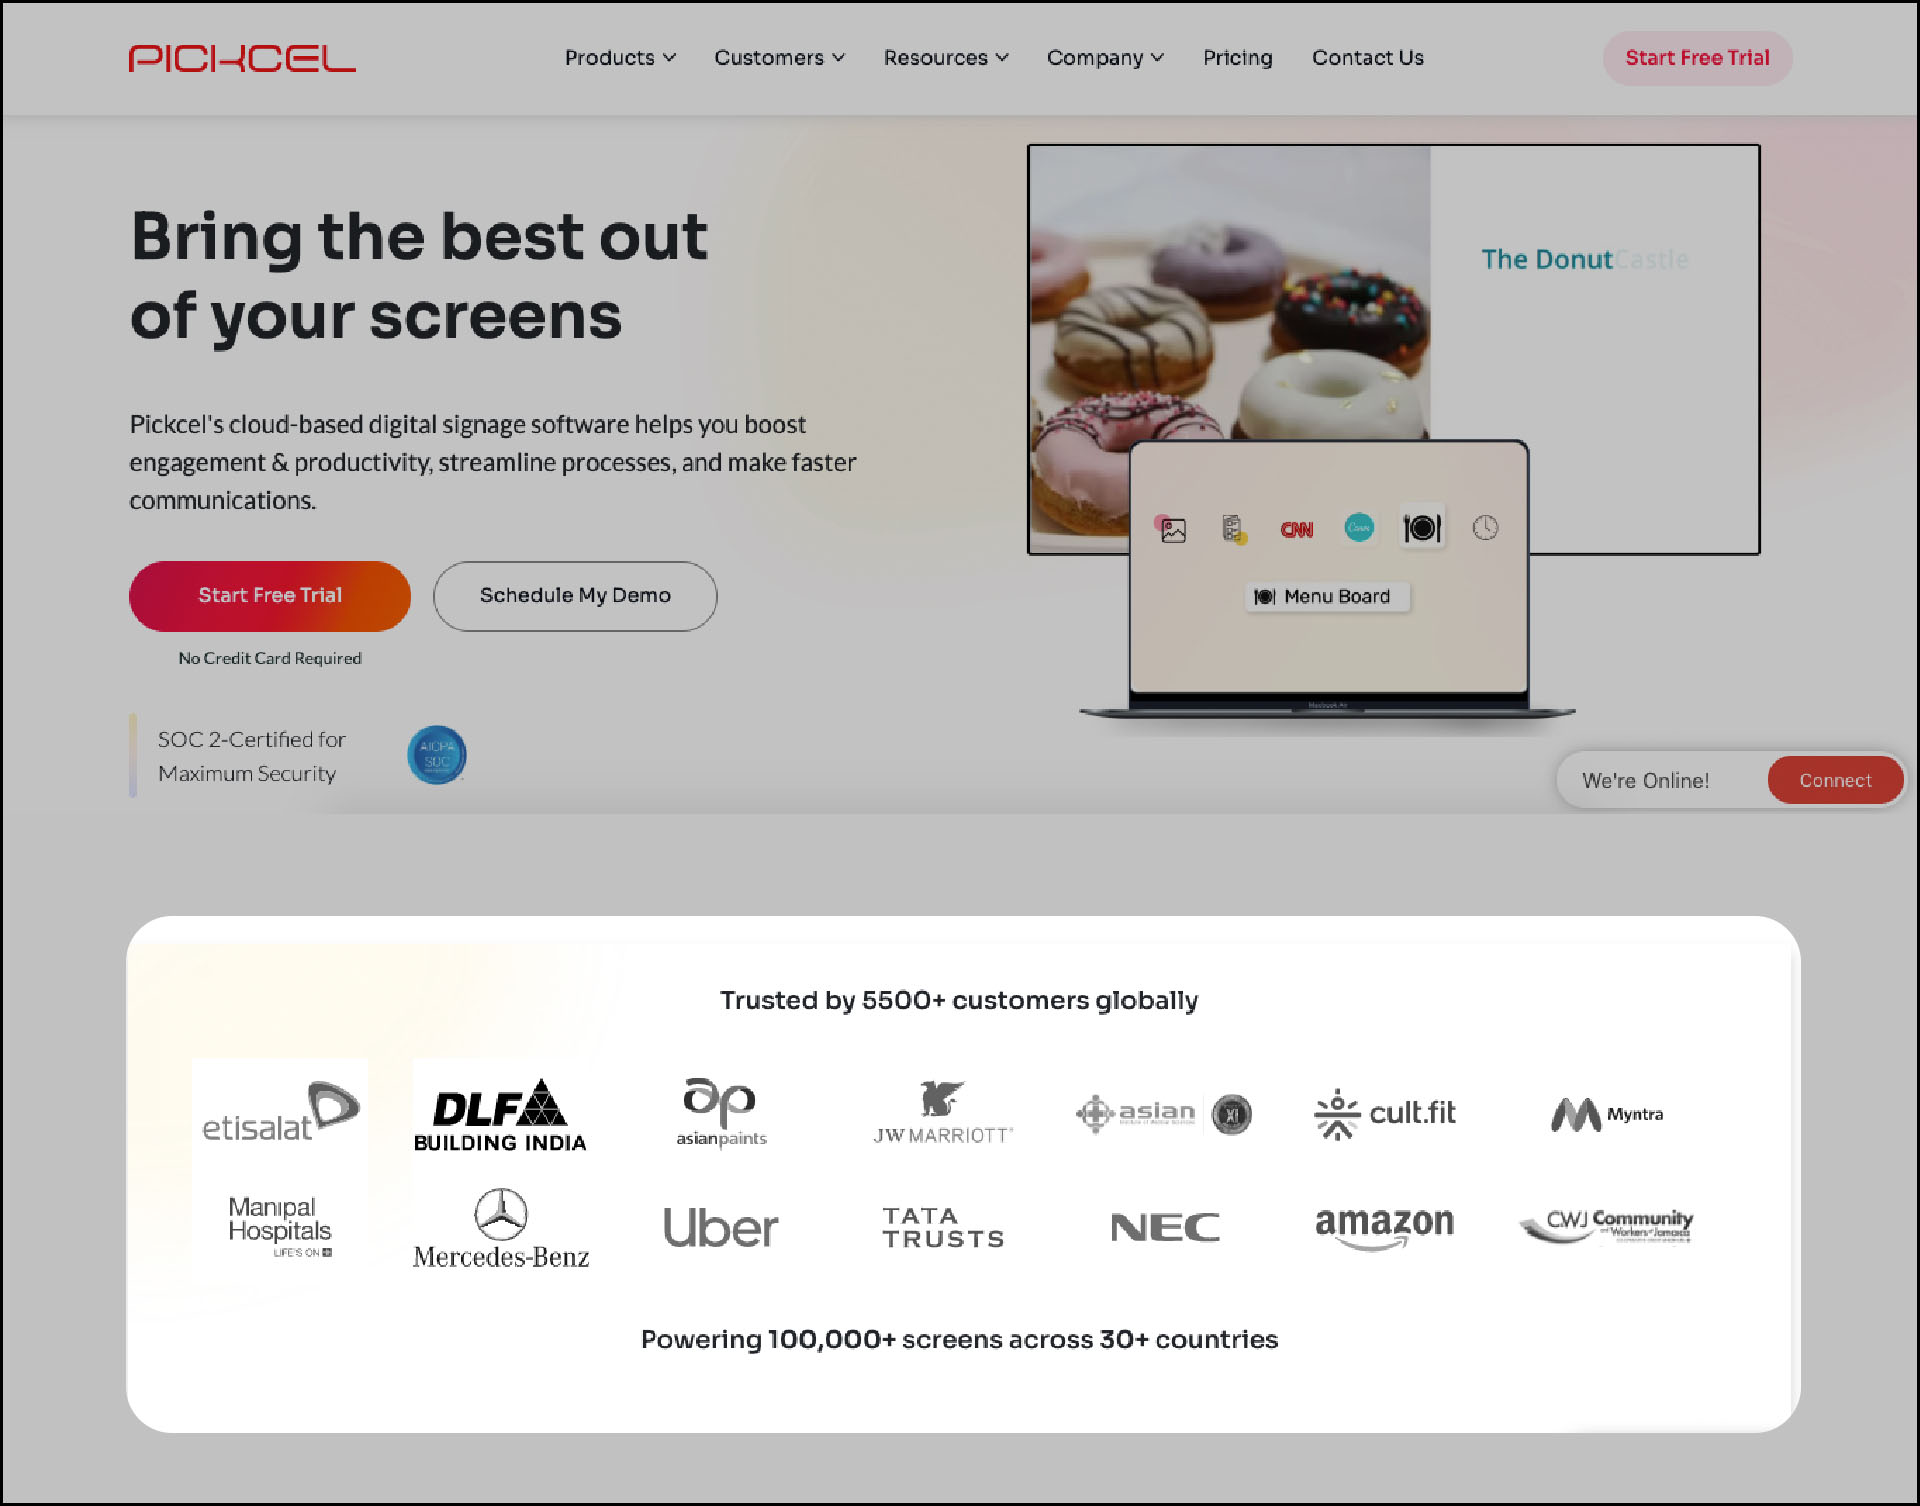 A screenshot of the Pickcel home page shows the software company's client list